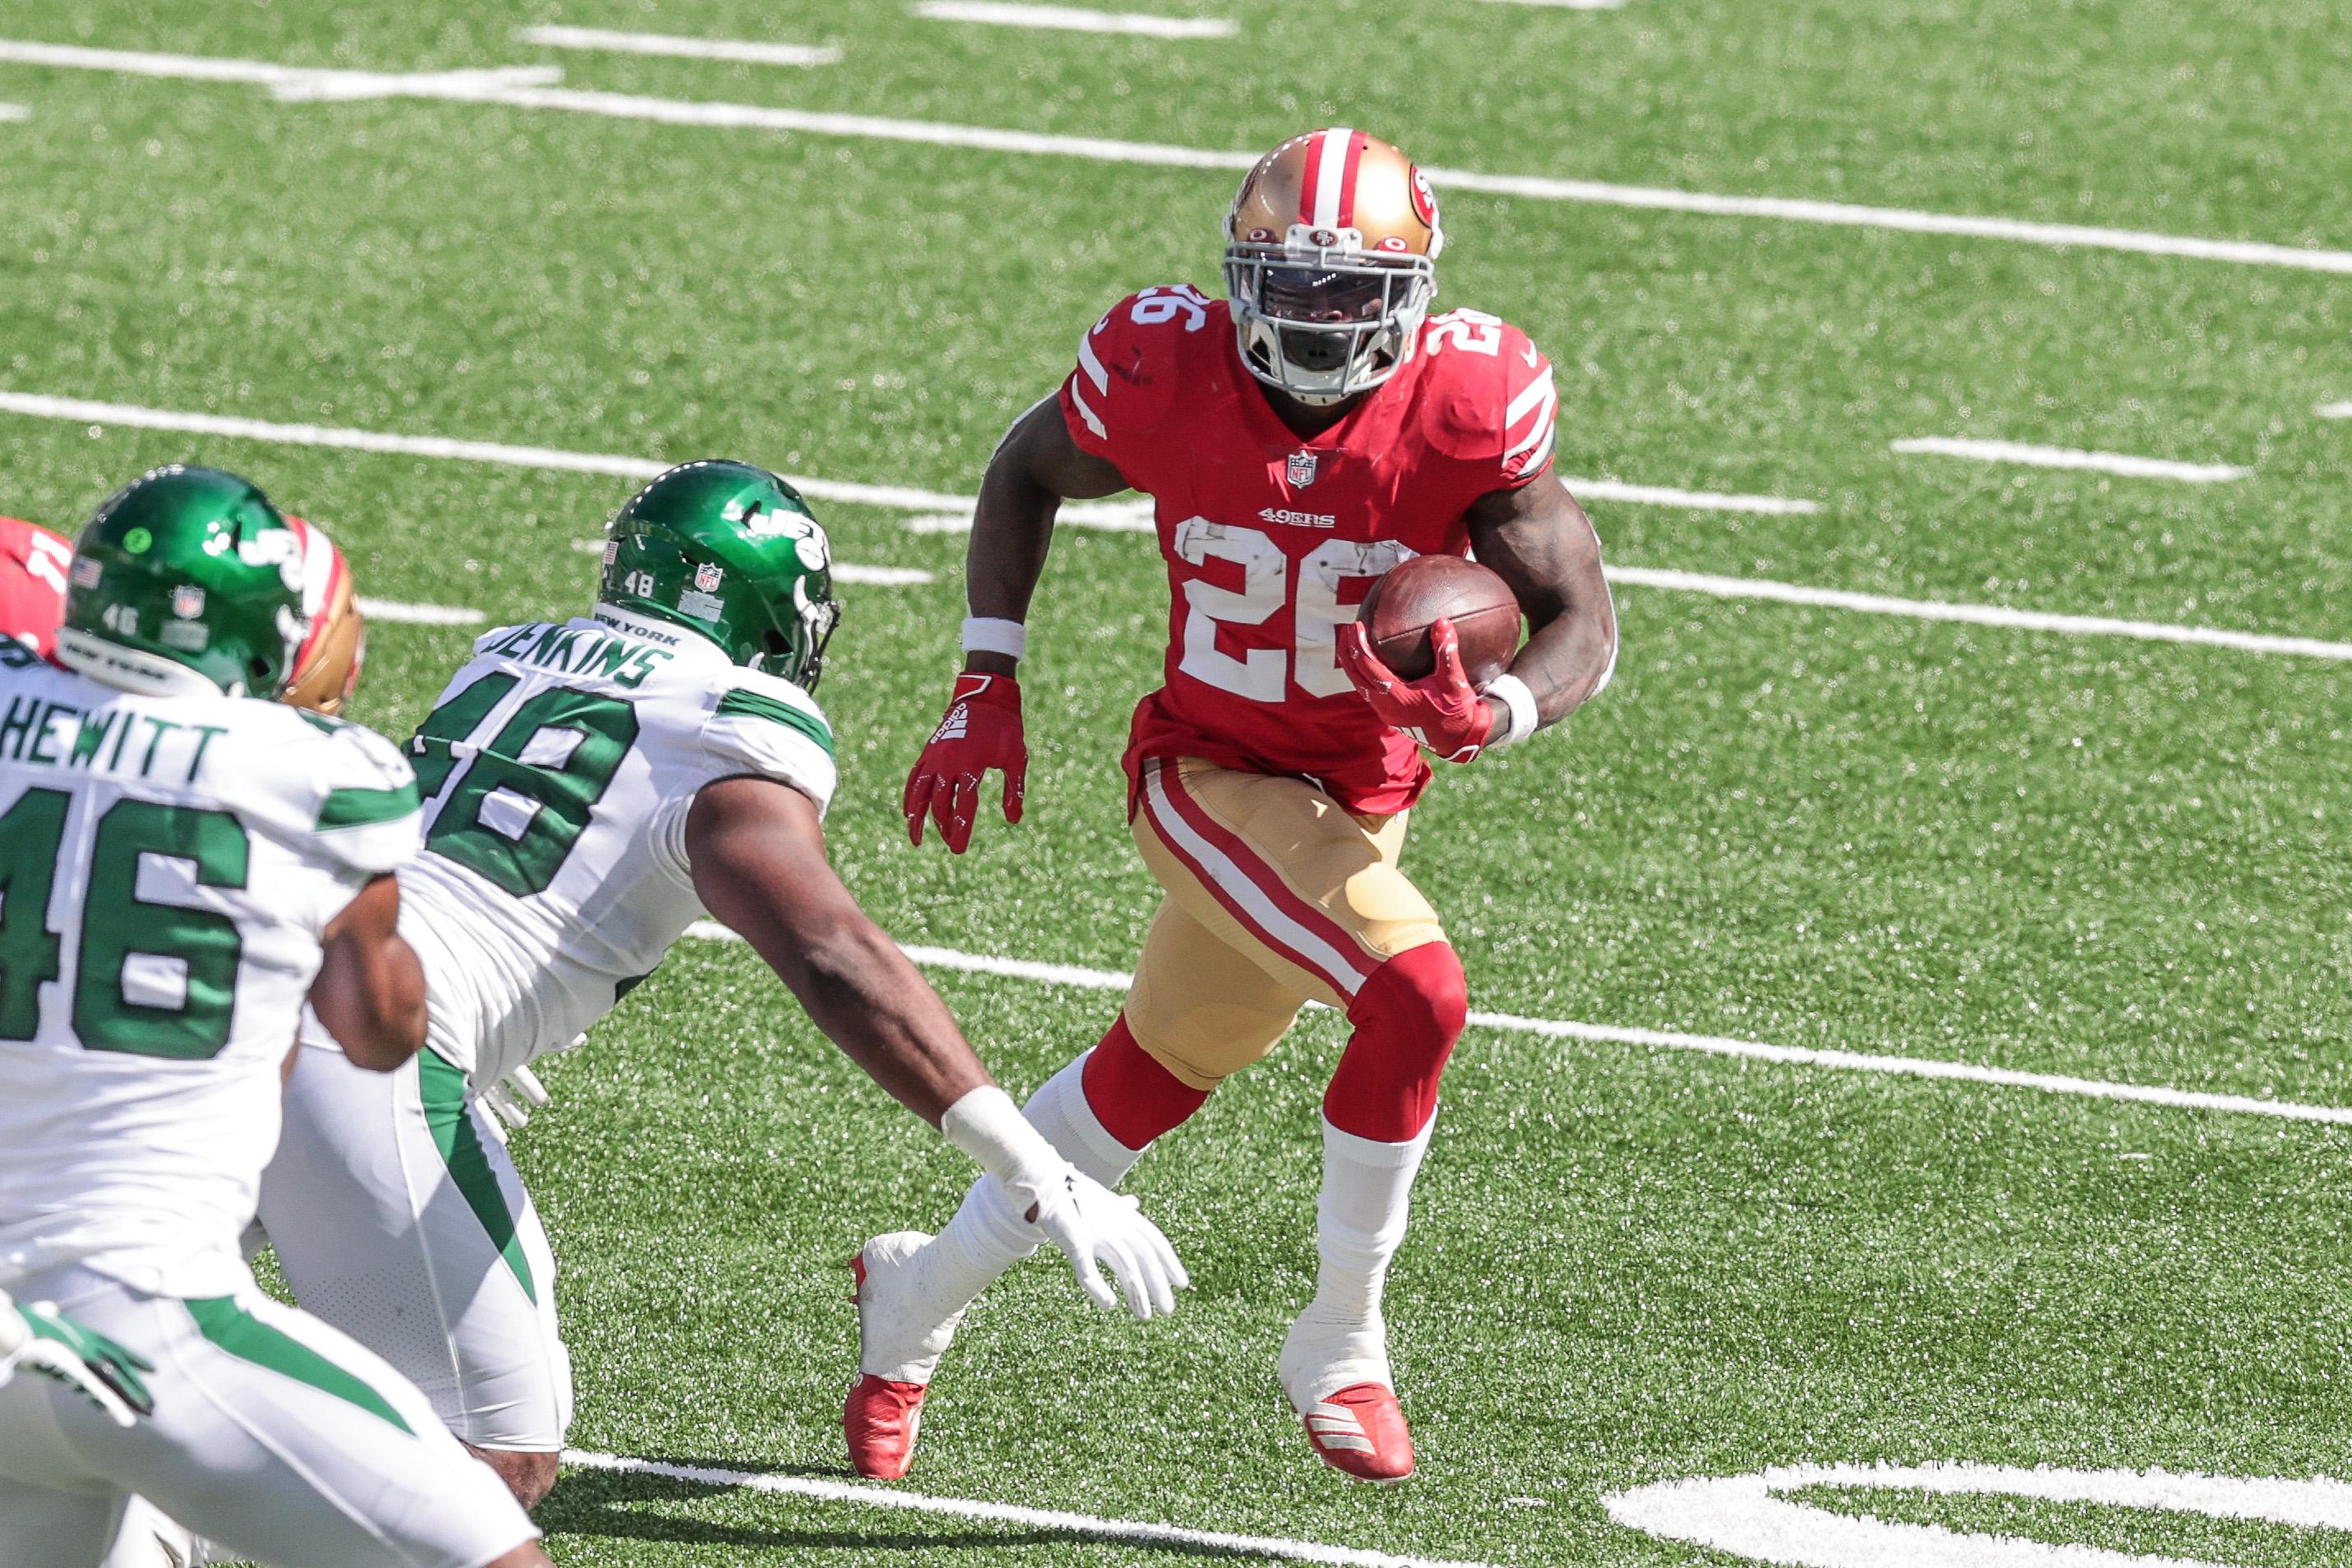 Sep 20, 2020; East Rutherford, New Jersey, USA; San Francisco 49ers running back Tevin Coleman (26) carries the ball as New York Jets outside linebacker Jordan Jenkins (48) defends during the second half at MetLife Stadium. Mandatory Credit: Vincent Carchietta-USA TODAY Sports / © Vincent Carchietta-USA TODAY Sports